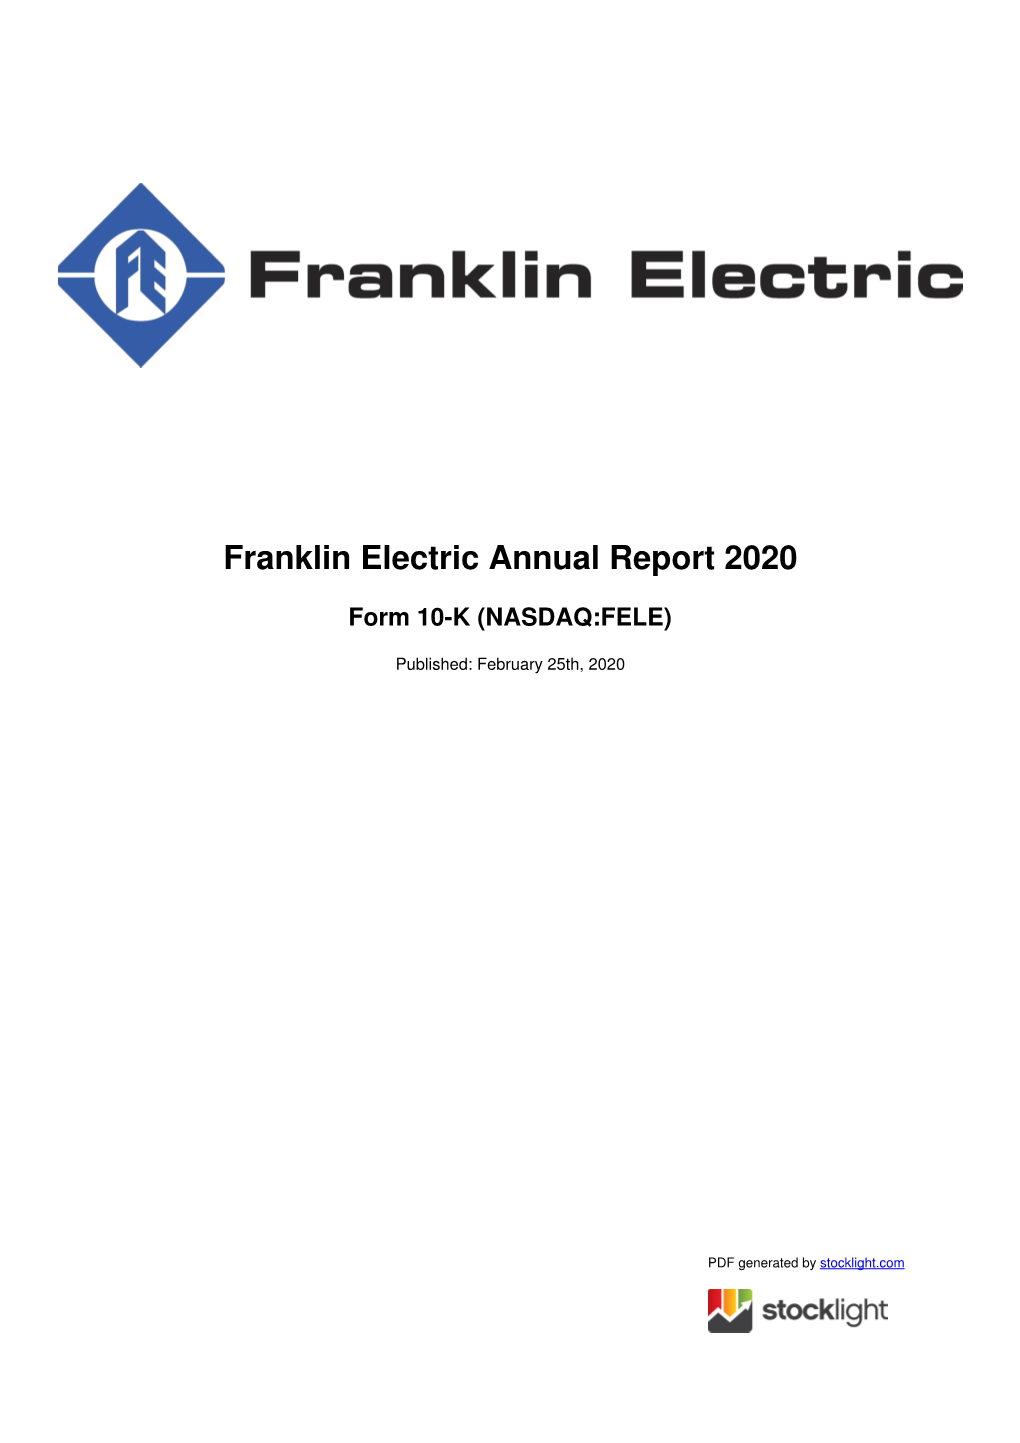 Franklin Electric Annual Report 2020